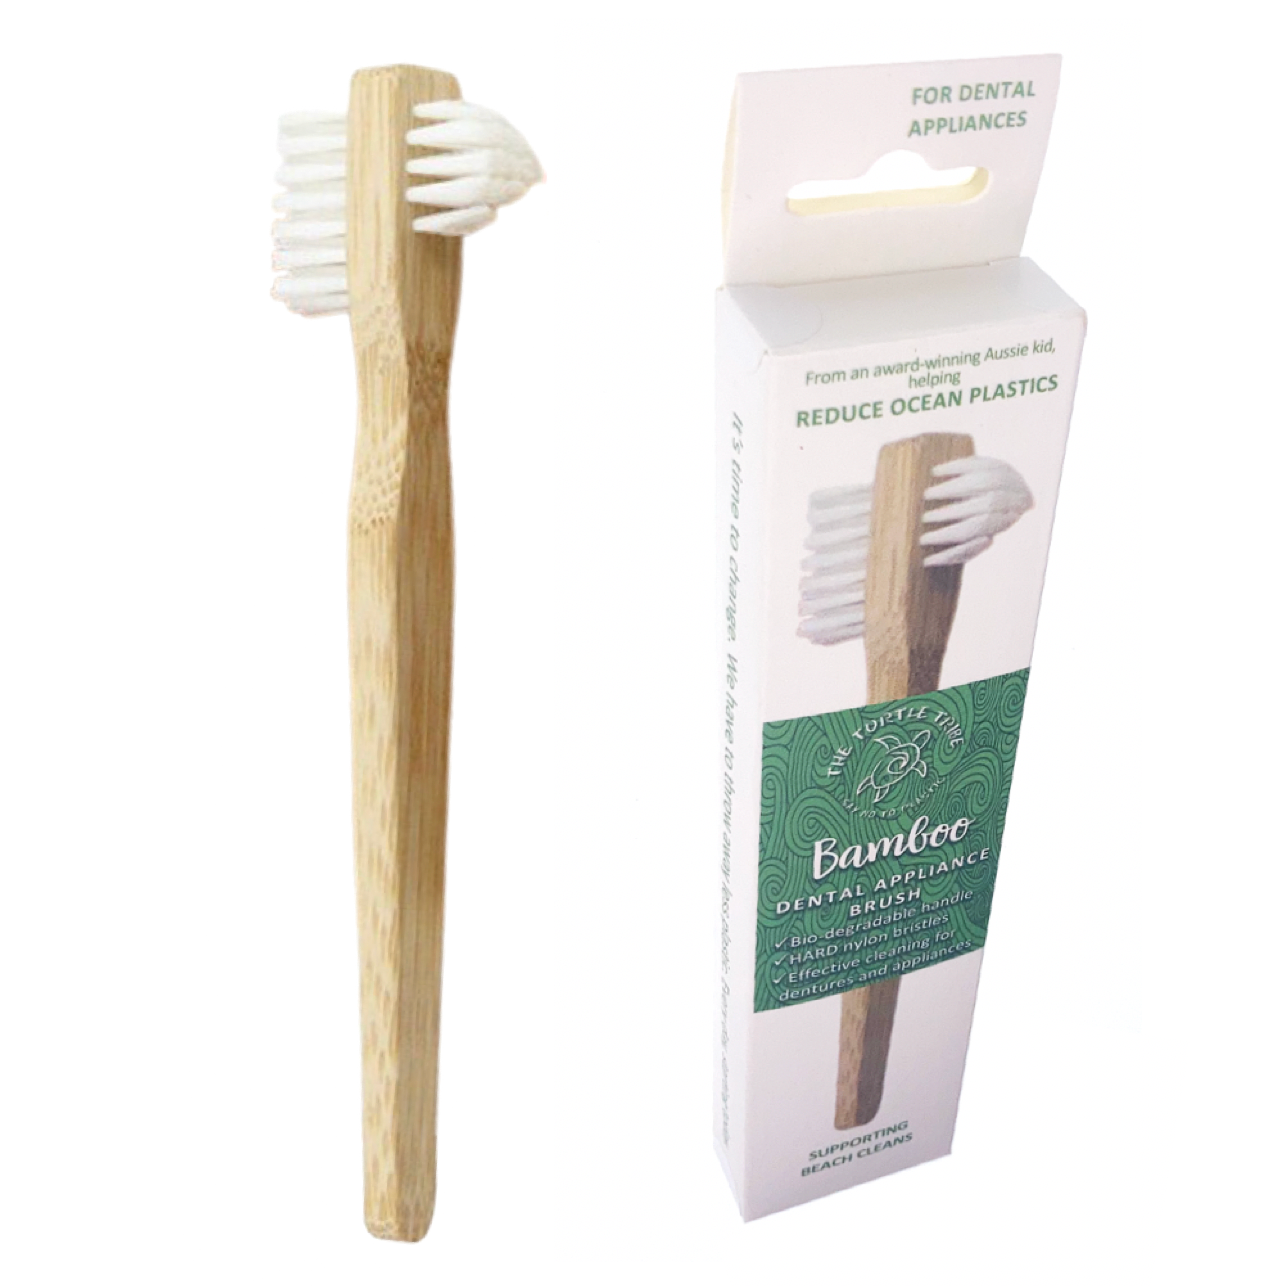 Bamboo Dental Appliance brush (The Turtle Tribe) each